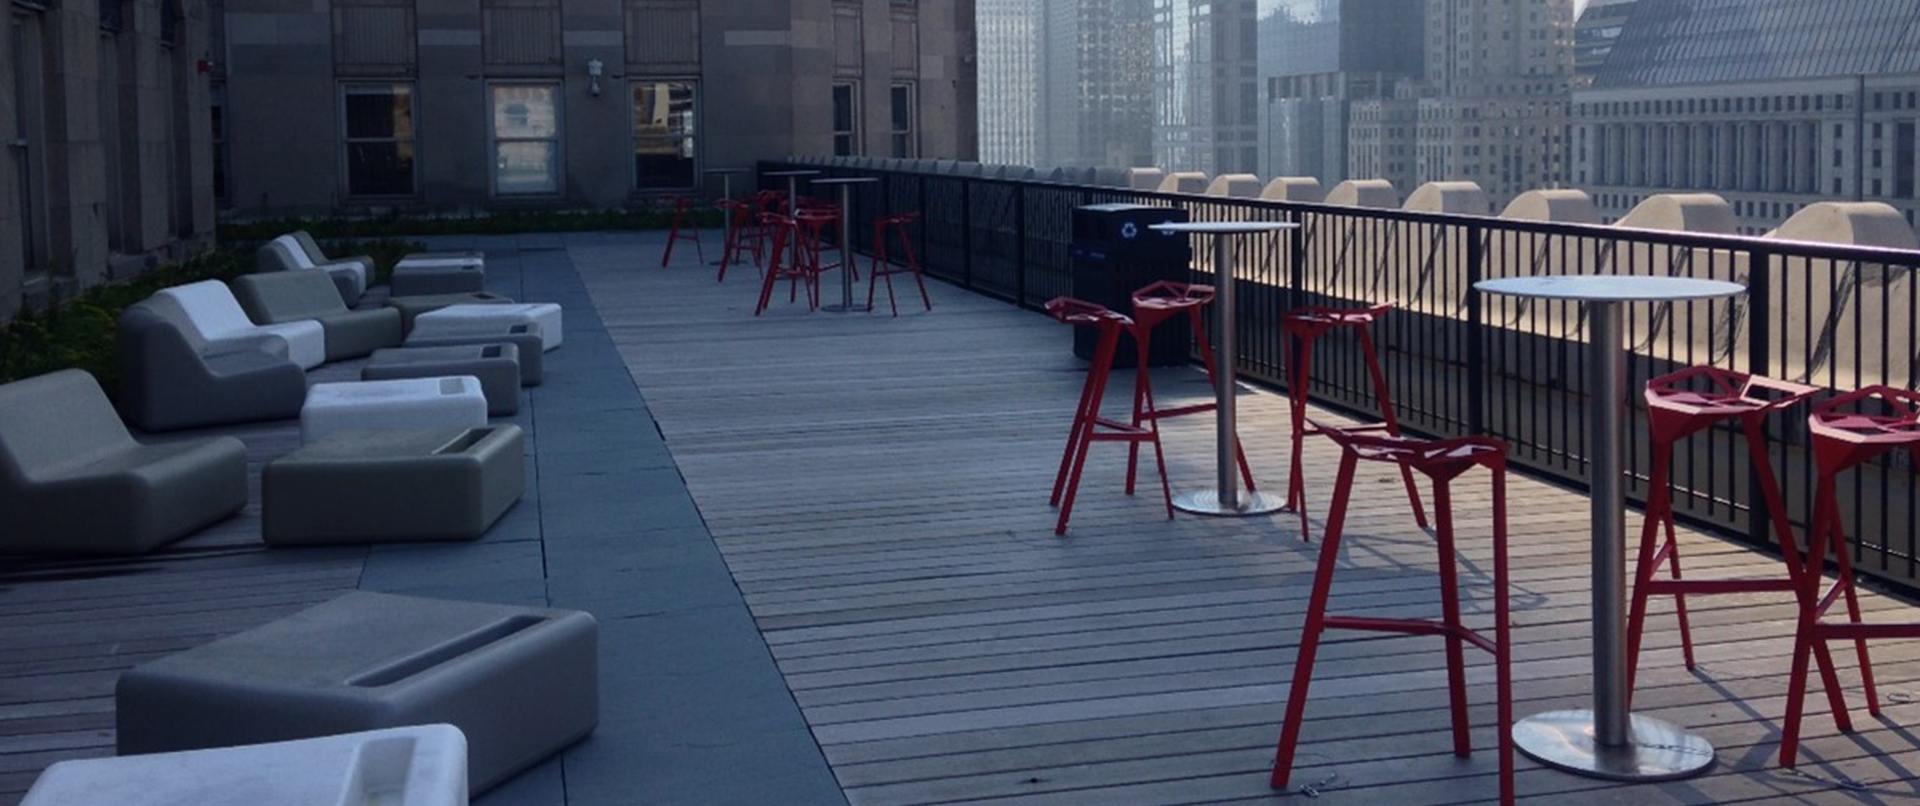 Urban Rooftop Seating Area